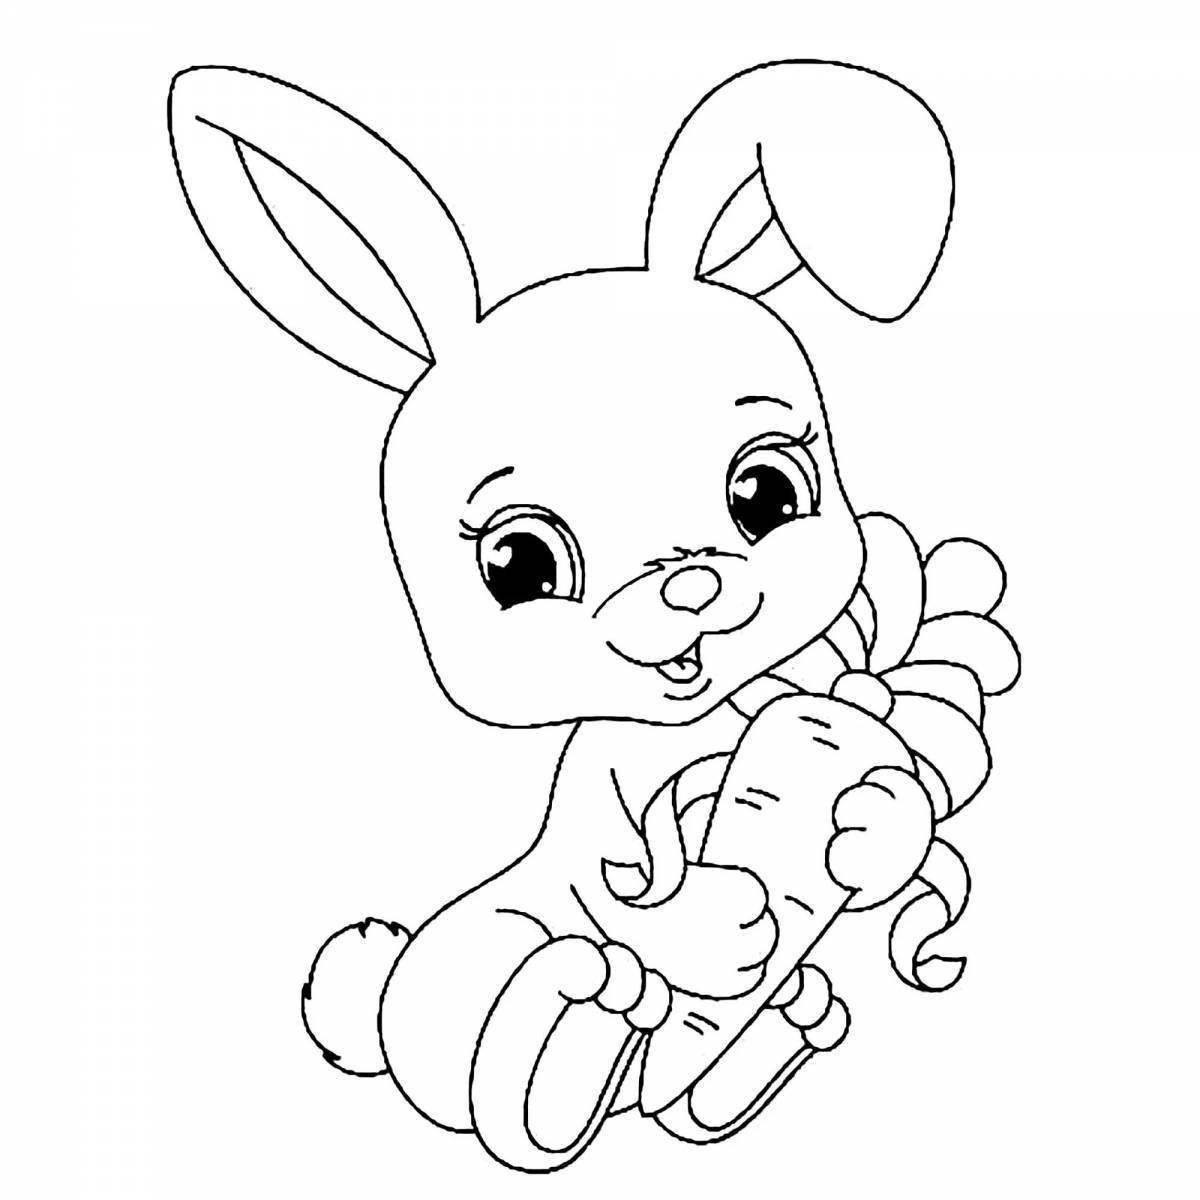 Attractive bunny drawing for kids